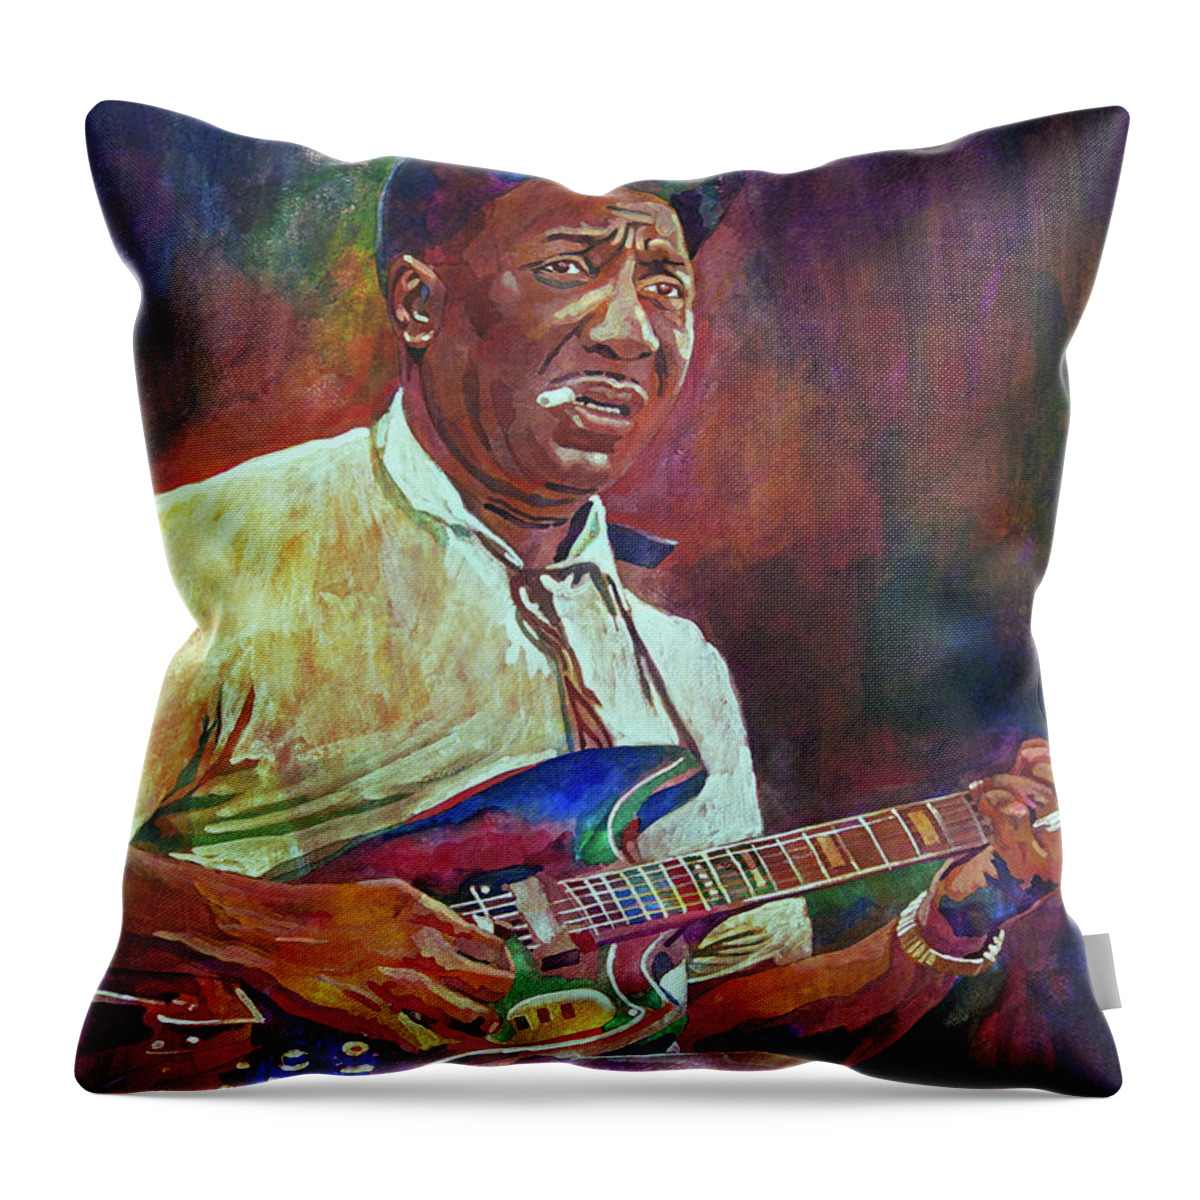 Blues Legend Throw Pillow featuring the painting Muddy Waters by David Lloyd Glover